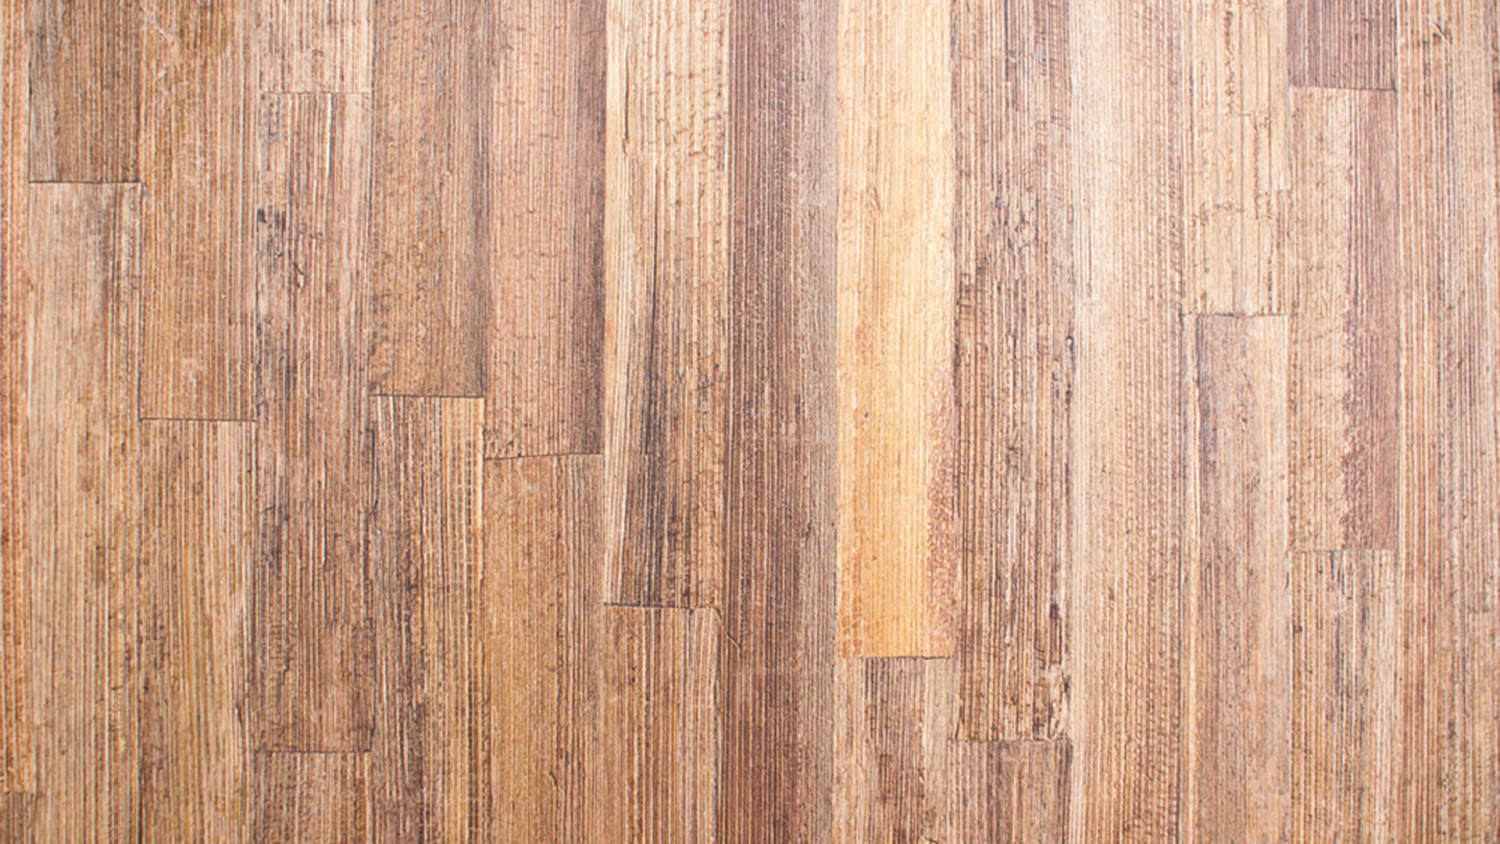 How Can I Get Rid Of Scratches On Wood Floor Answers To Your Home